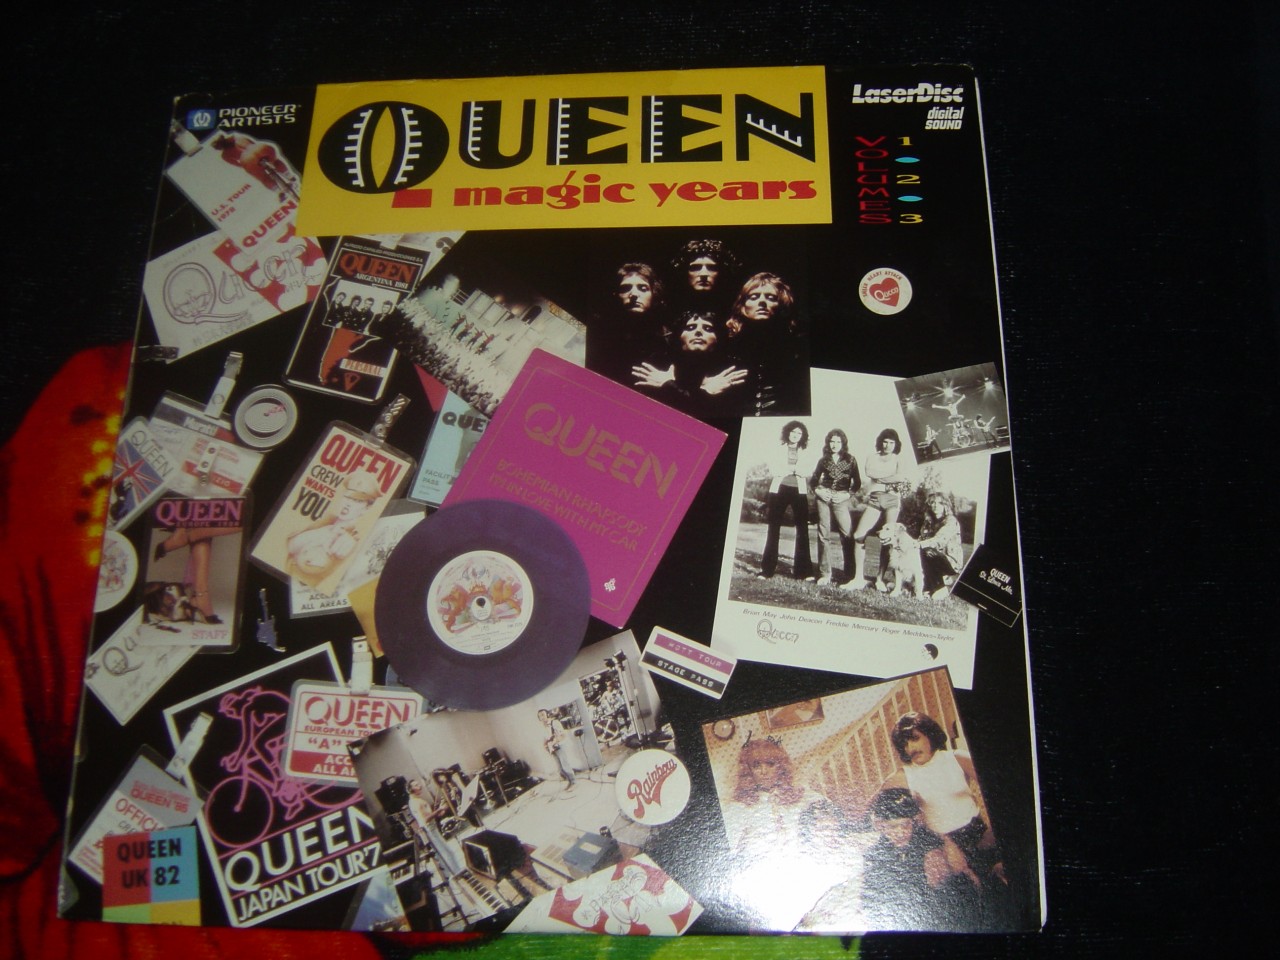 Queen-Magic Years Vol. 1,2,3 Laser Disc X 3 Mint & Rare - ubuycd